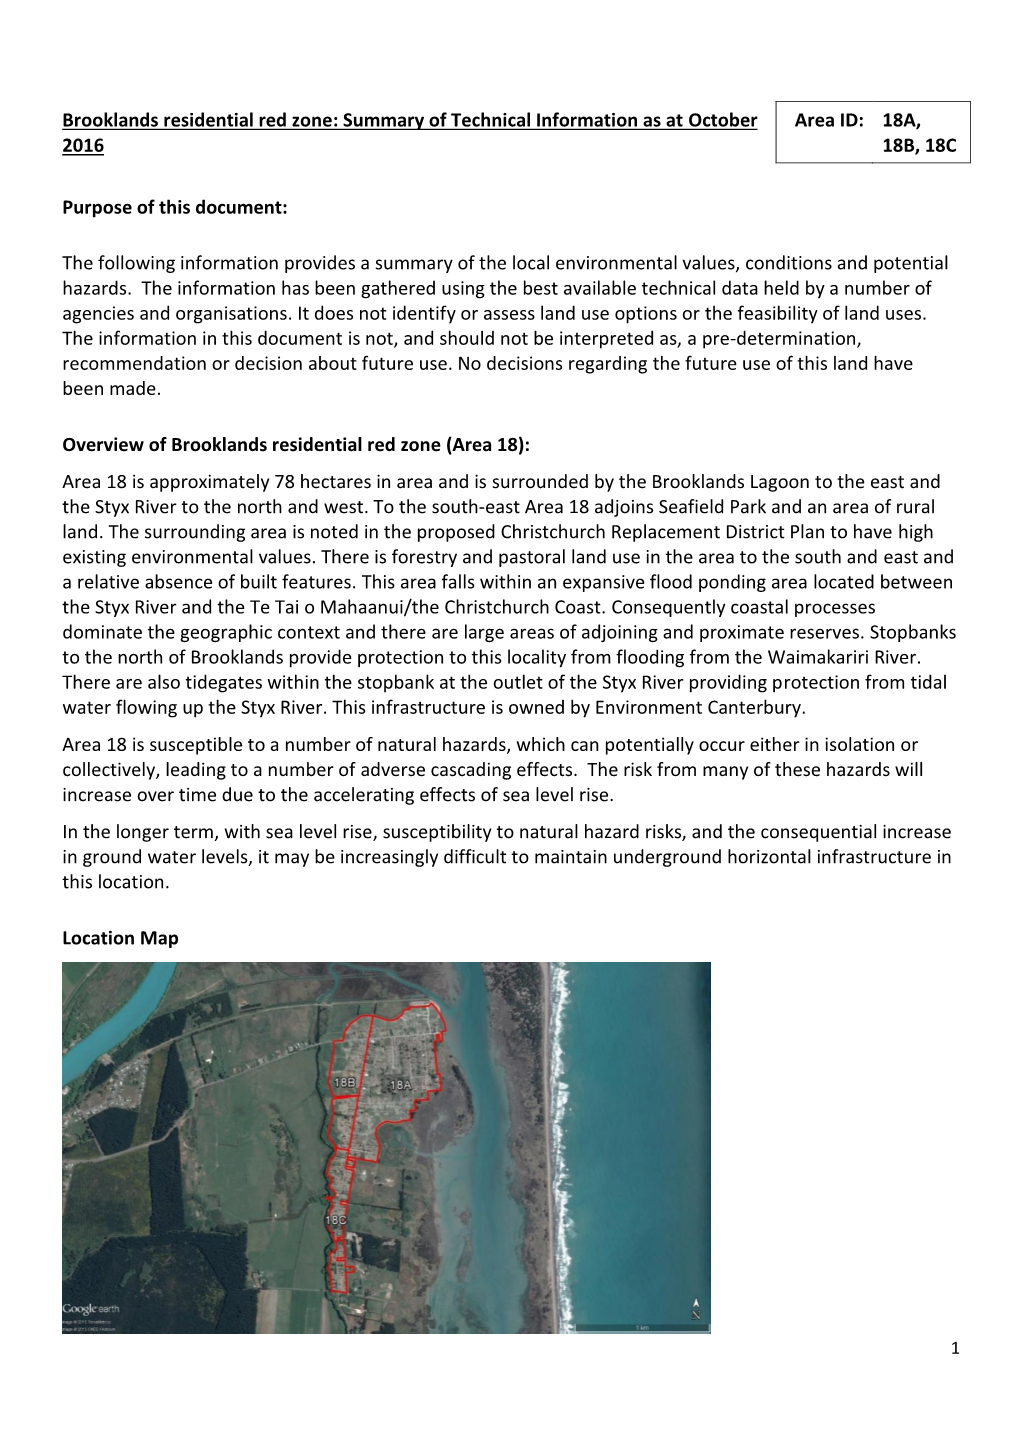 Brooklands Residential Red Zone: Summary of Technical Information As at October Area ID: 18A, 2016 18B, 18C